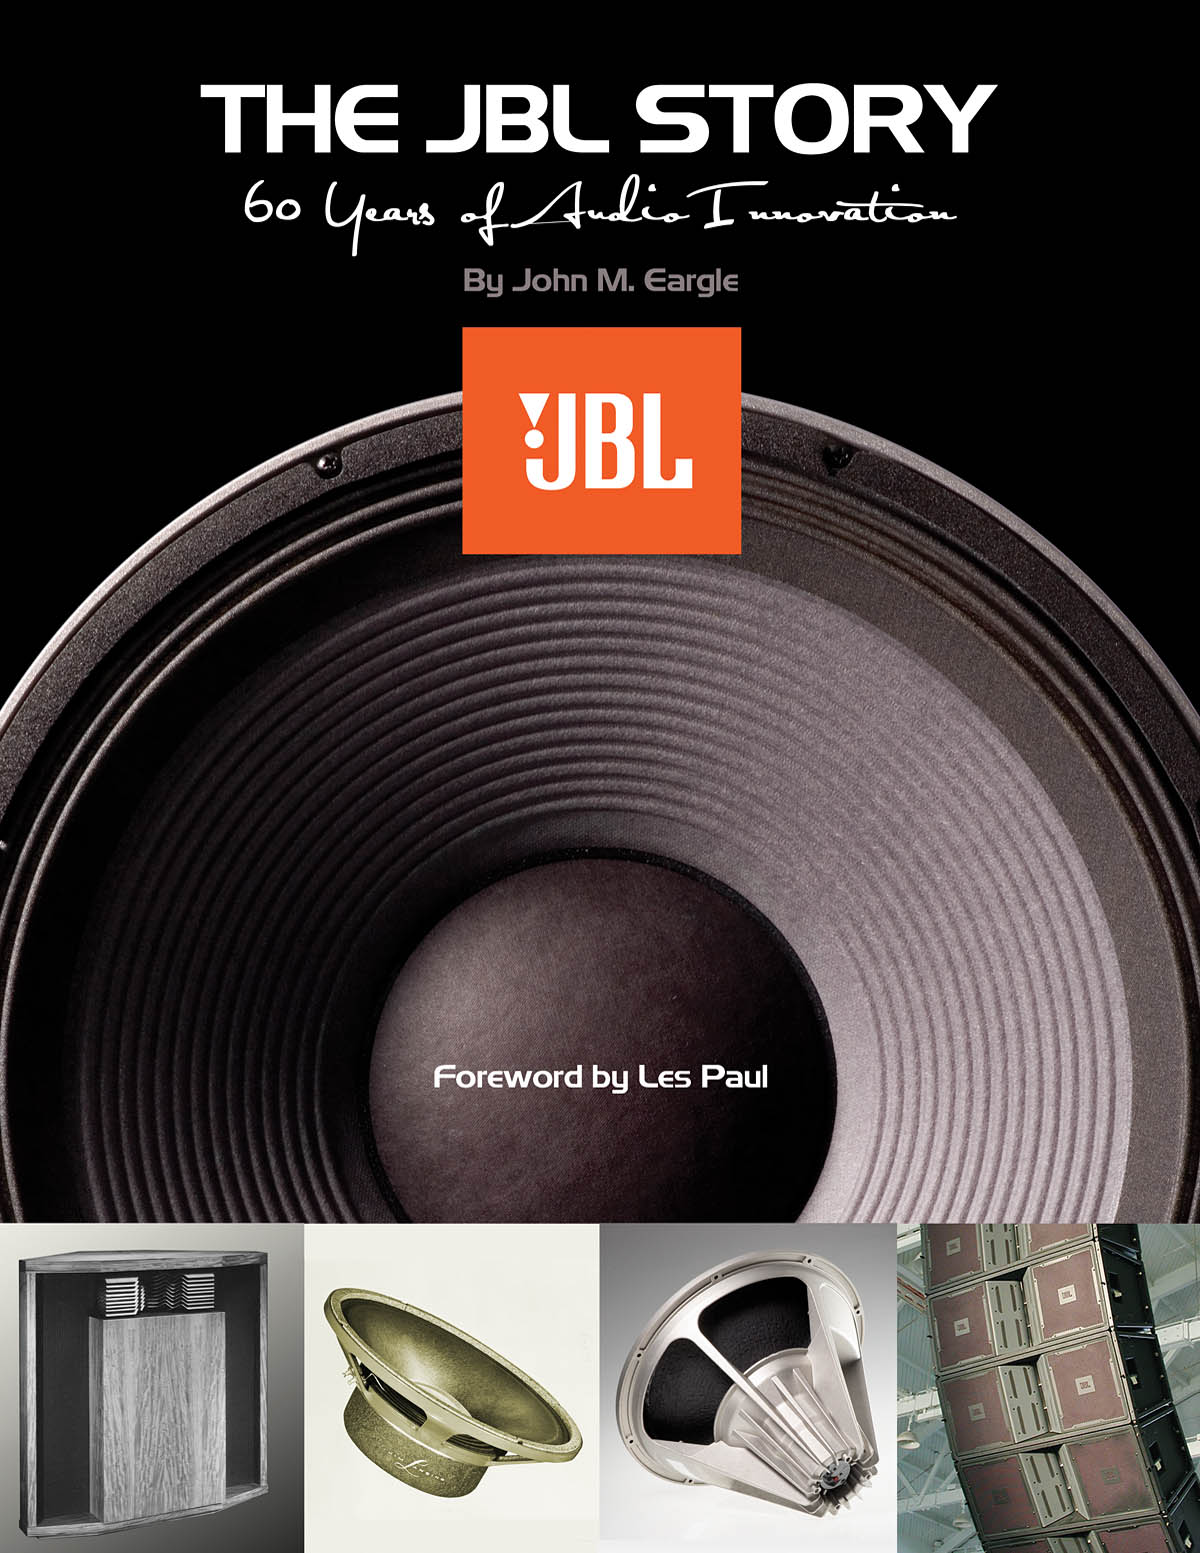 The JBL Story: Reference Books